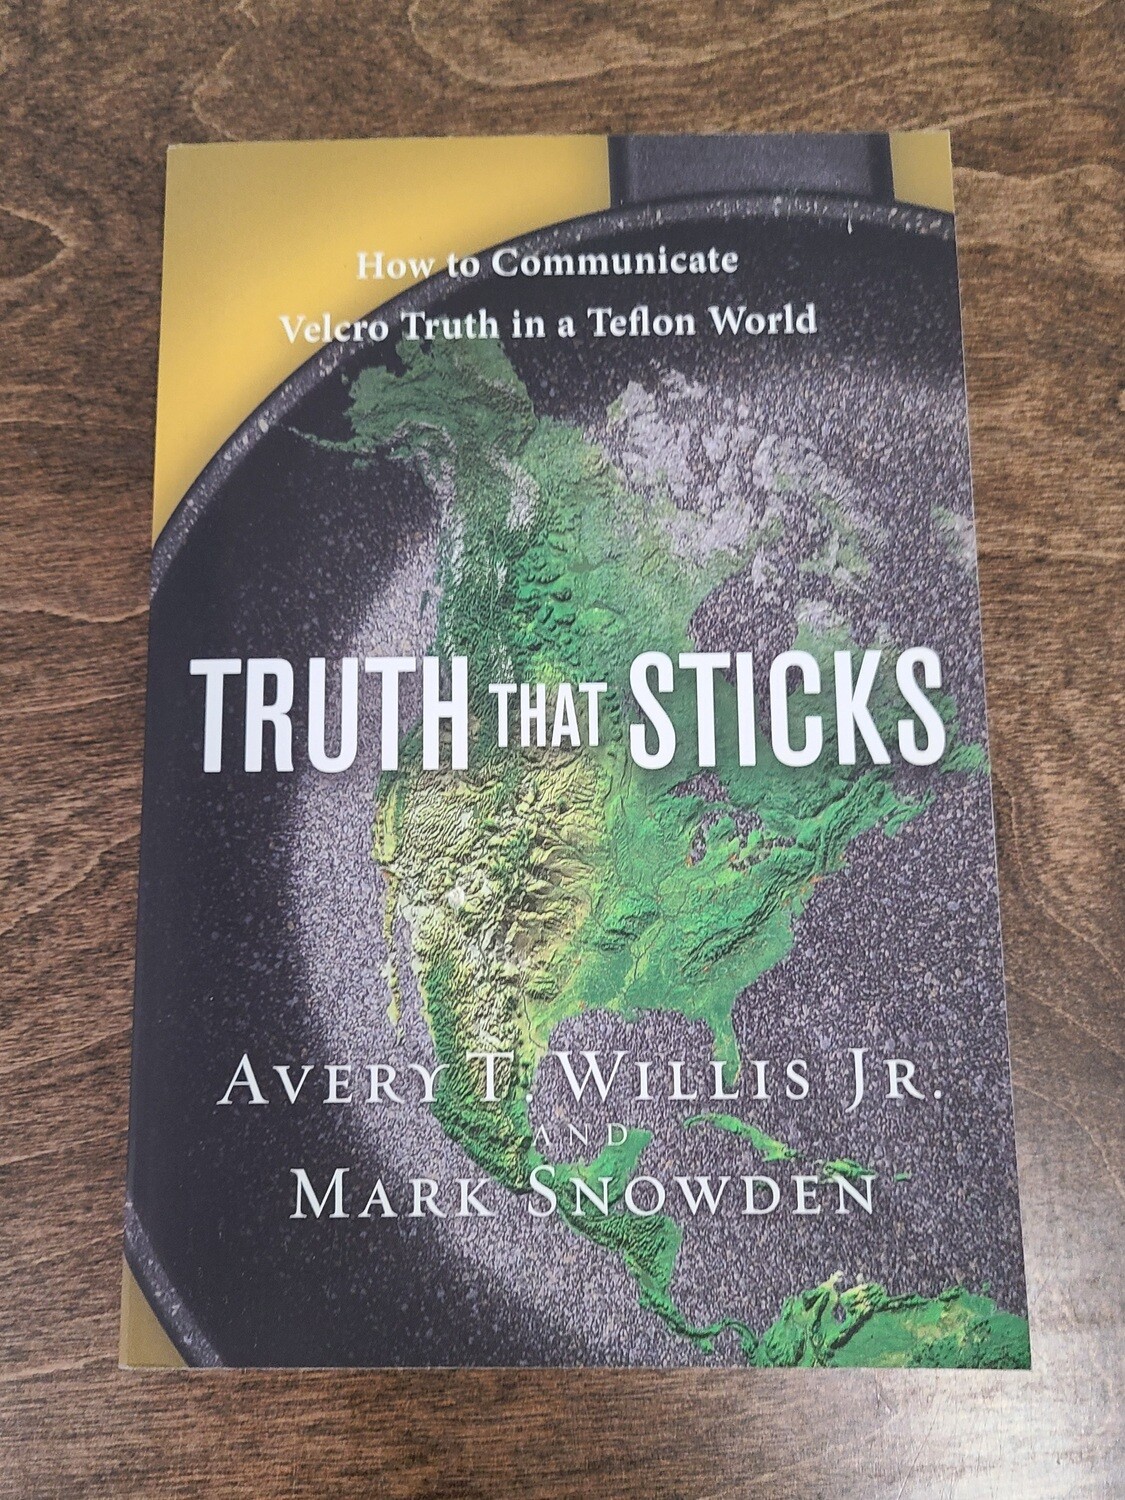 Truth That Sticks by Avery T. Willis Jr. and Mark Snowden